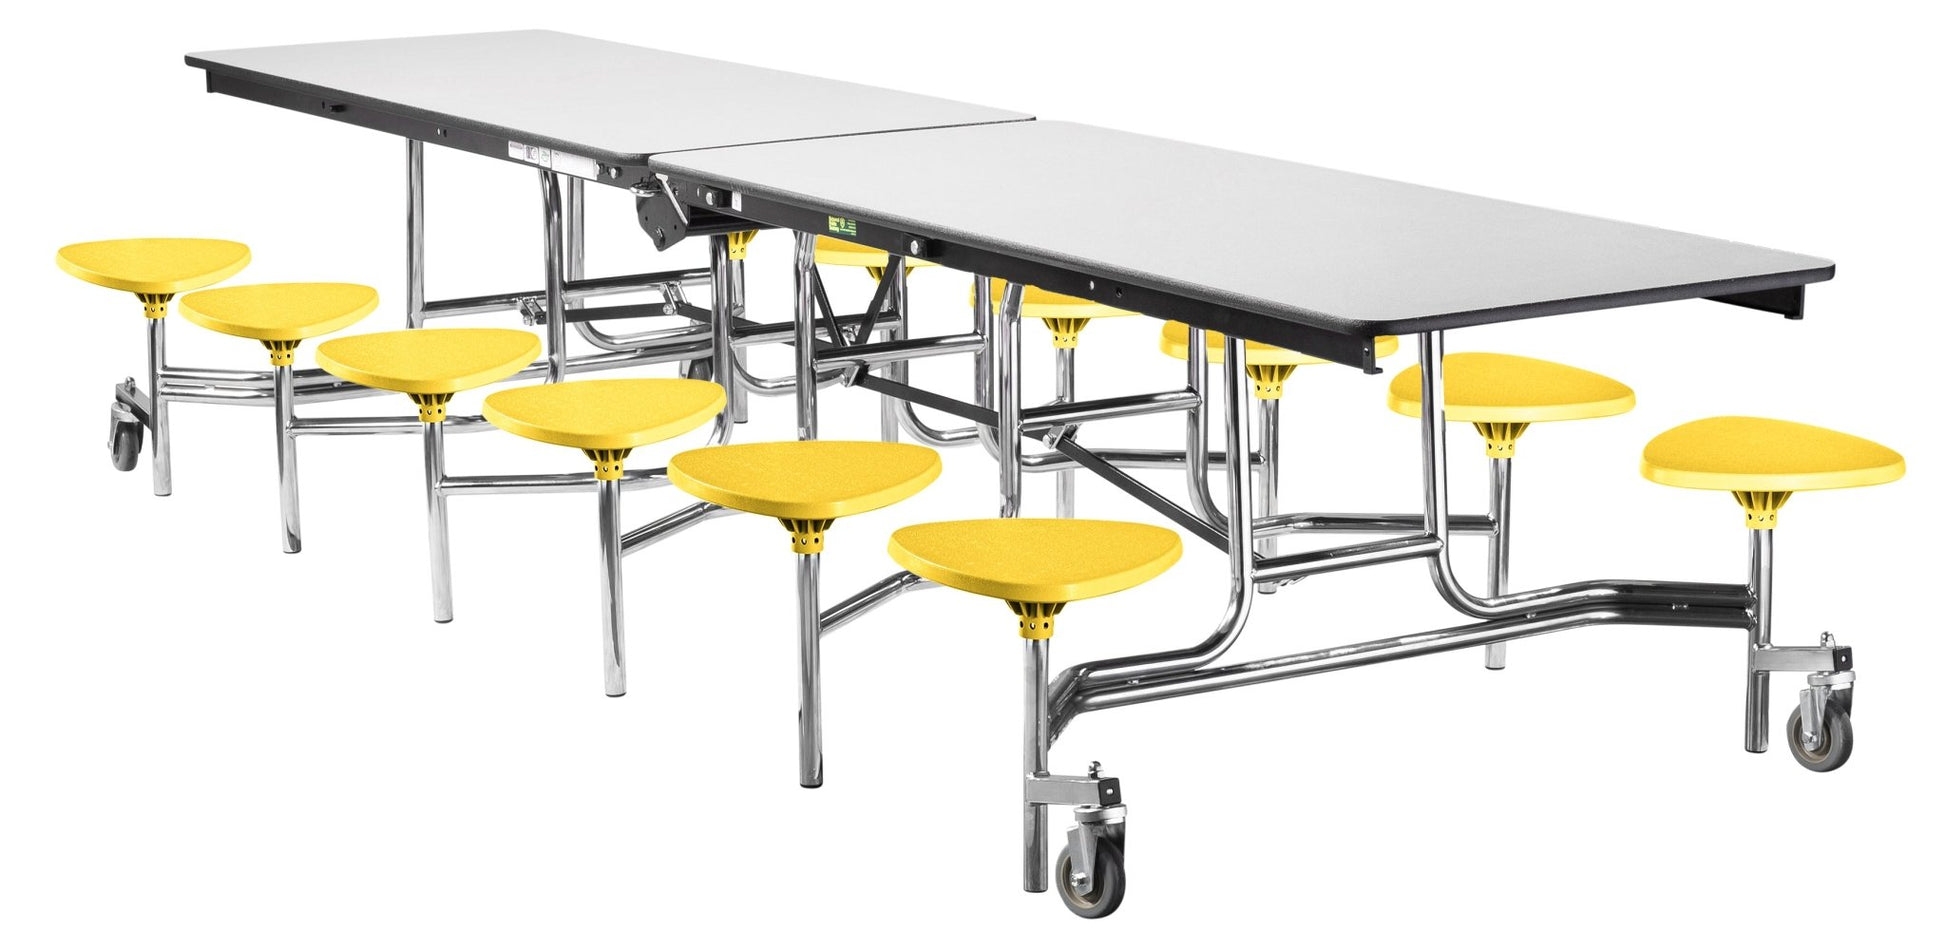 Mobile Cafeteria Lunchroom Stool Table - 30" W x 12' L - 12 Stools - Particleboard Core - T-Molding Edge - Chrome Frame - SchoolOutlet